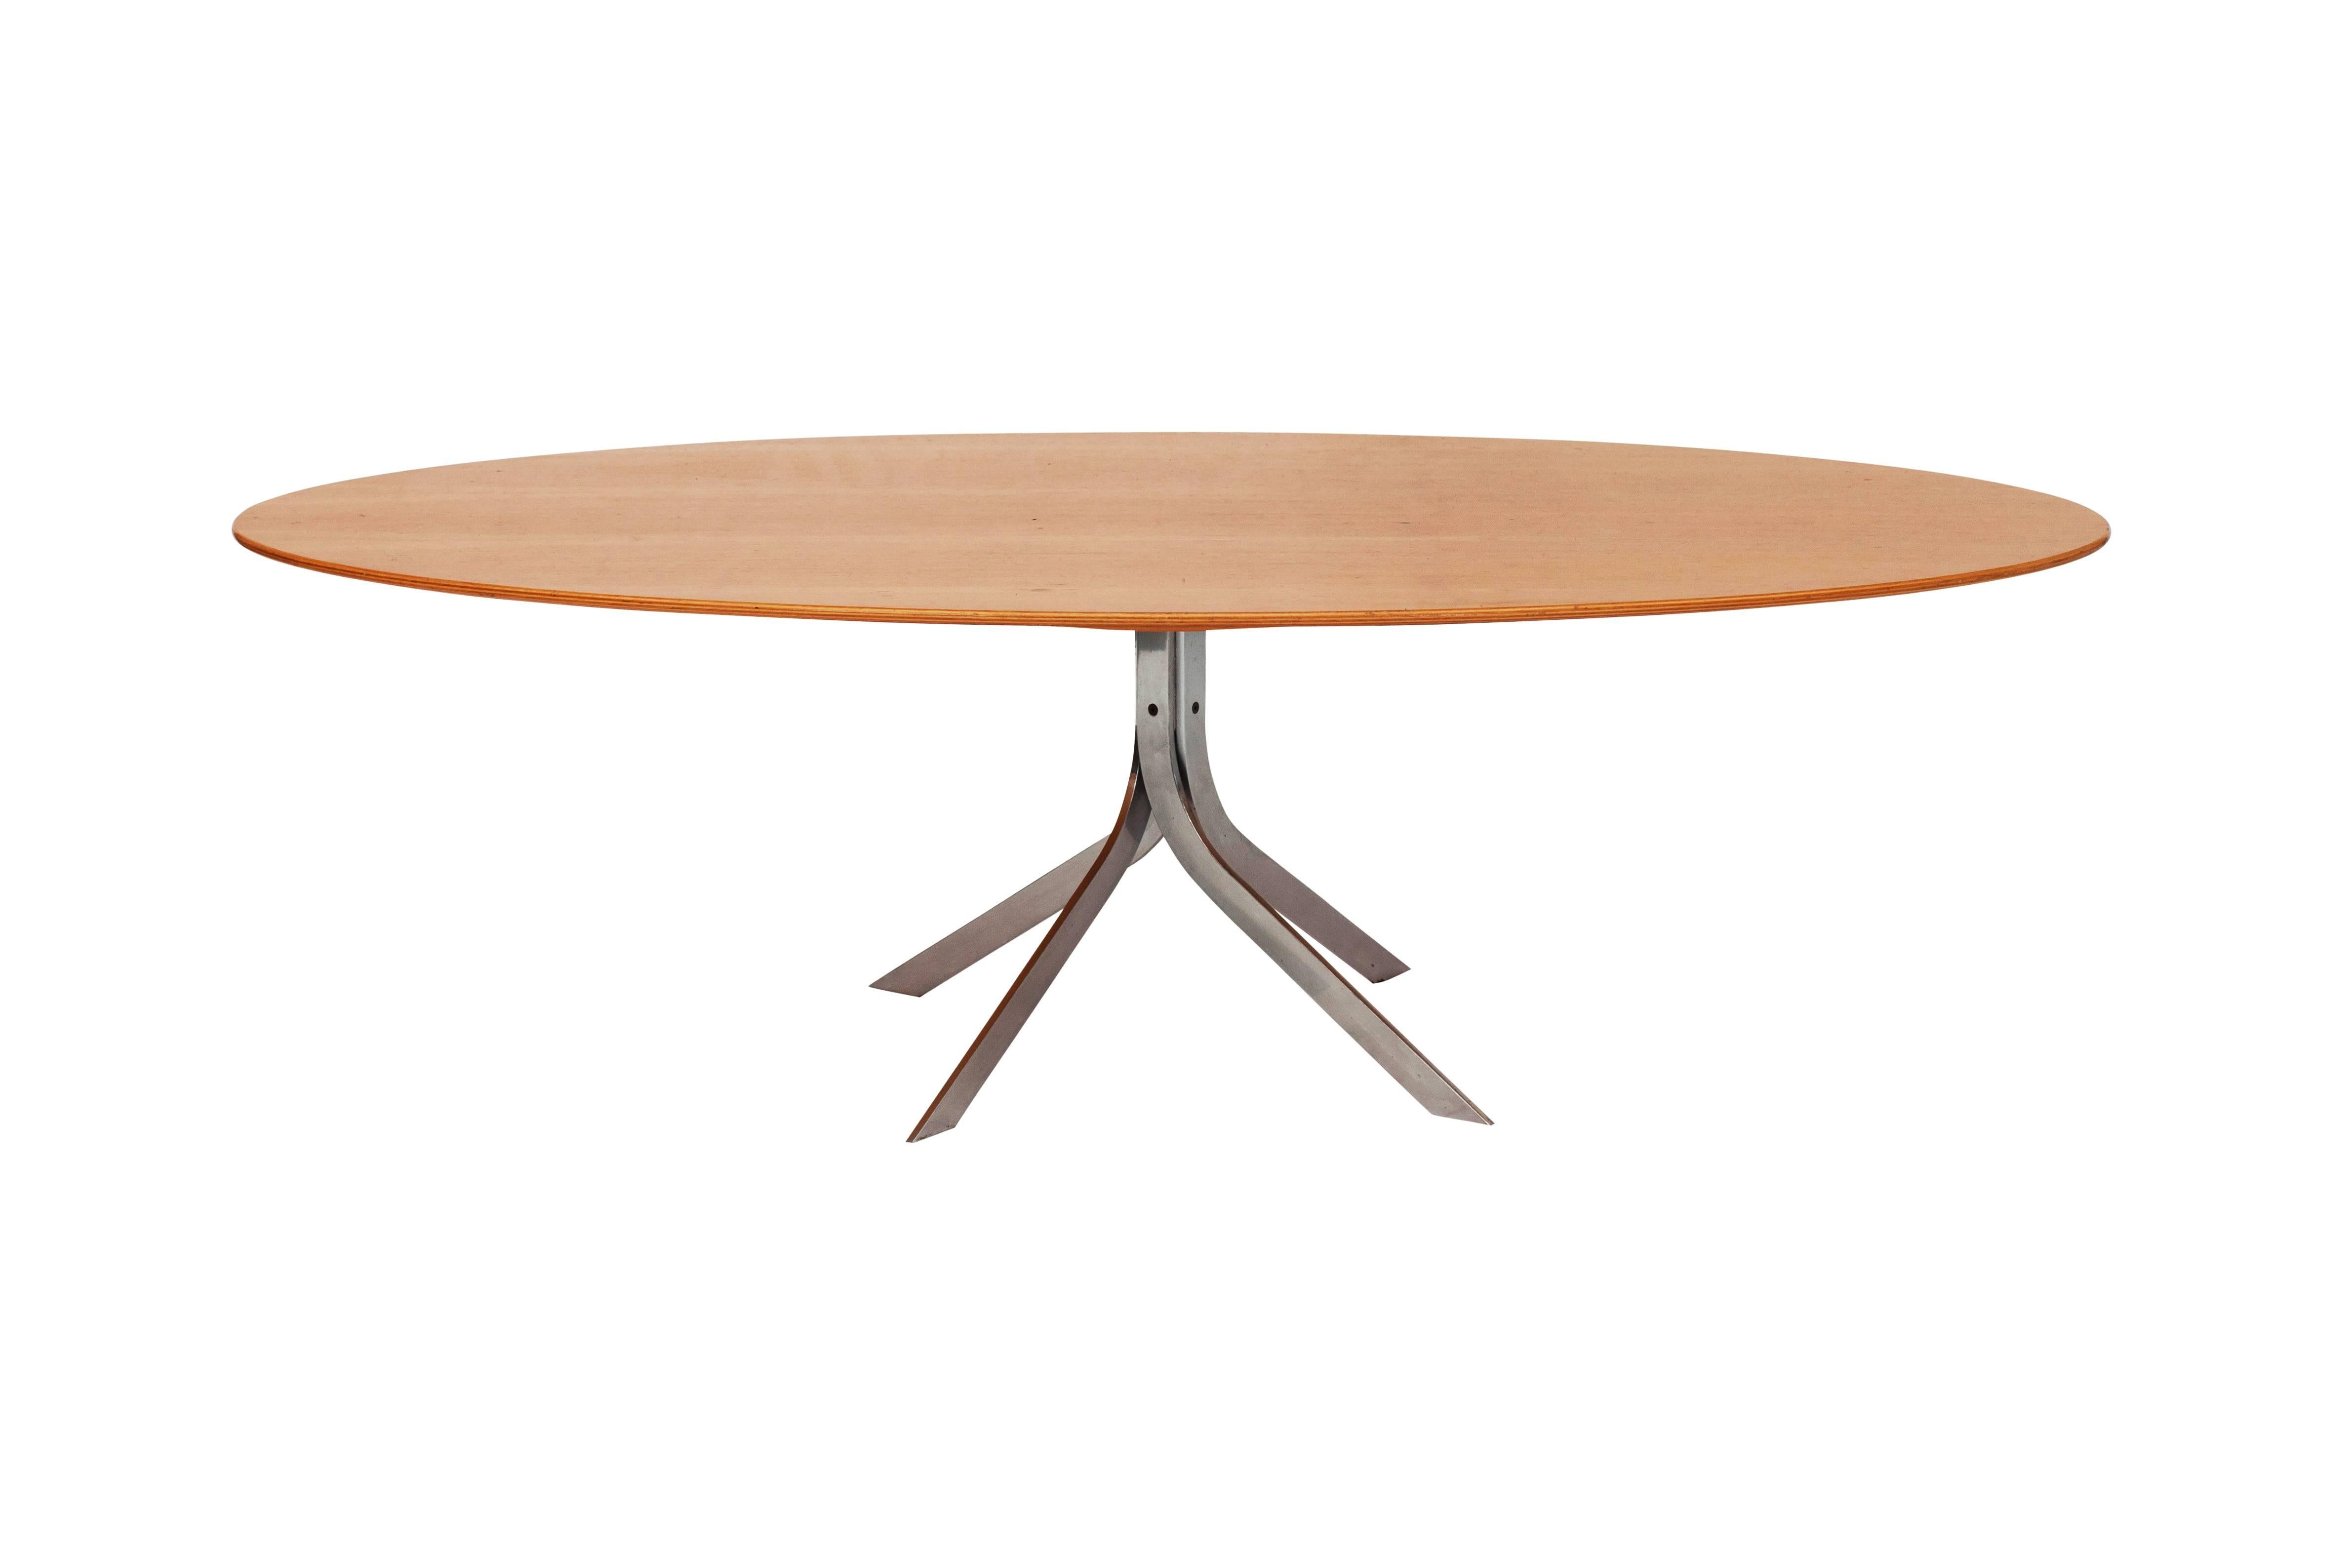 Mid-Century Modern oval coffee table.

Birch top mounted on a twisted stainless steel base

Reminds of the works of Poul Kjaerholm and Florence Knoll,

Denmark, 1960s

Measure: W 140 cm D 70 cm H 42 cm.